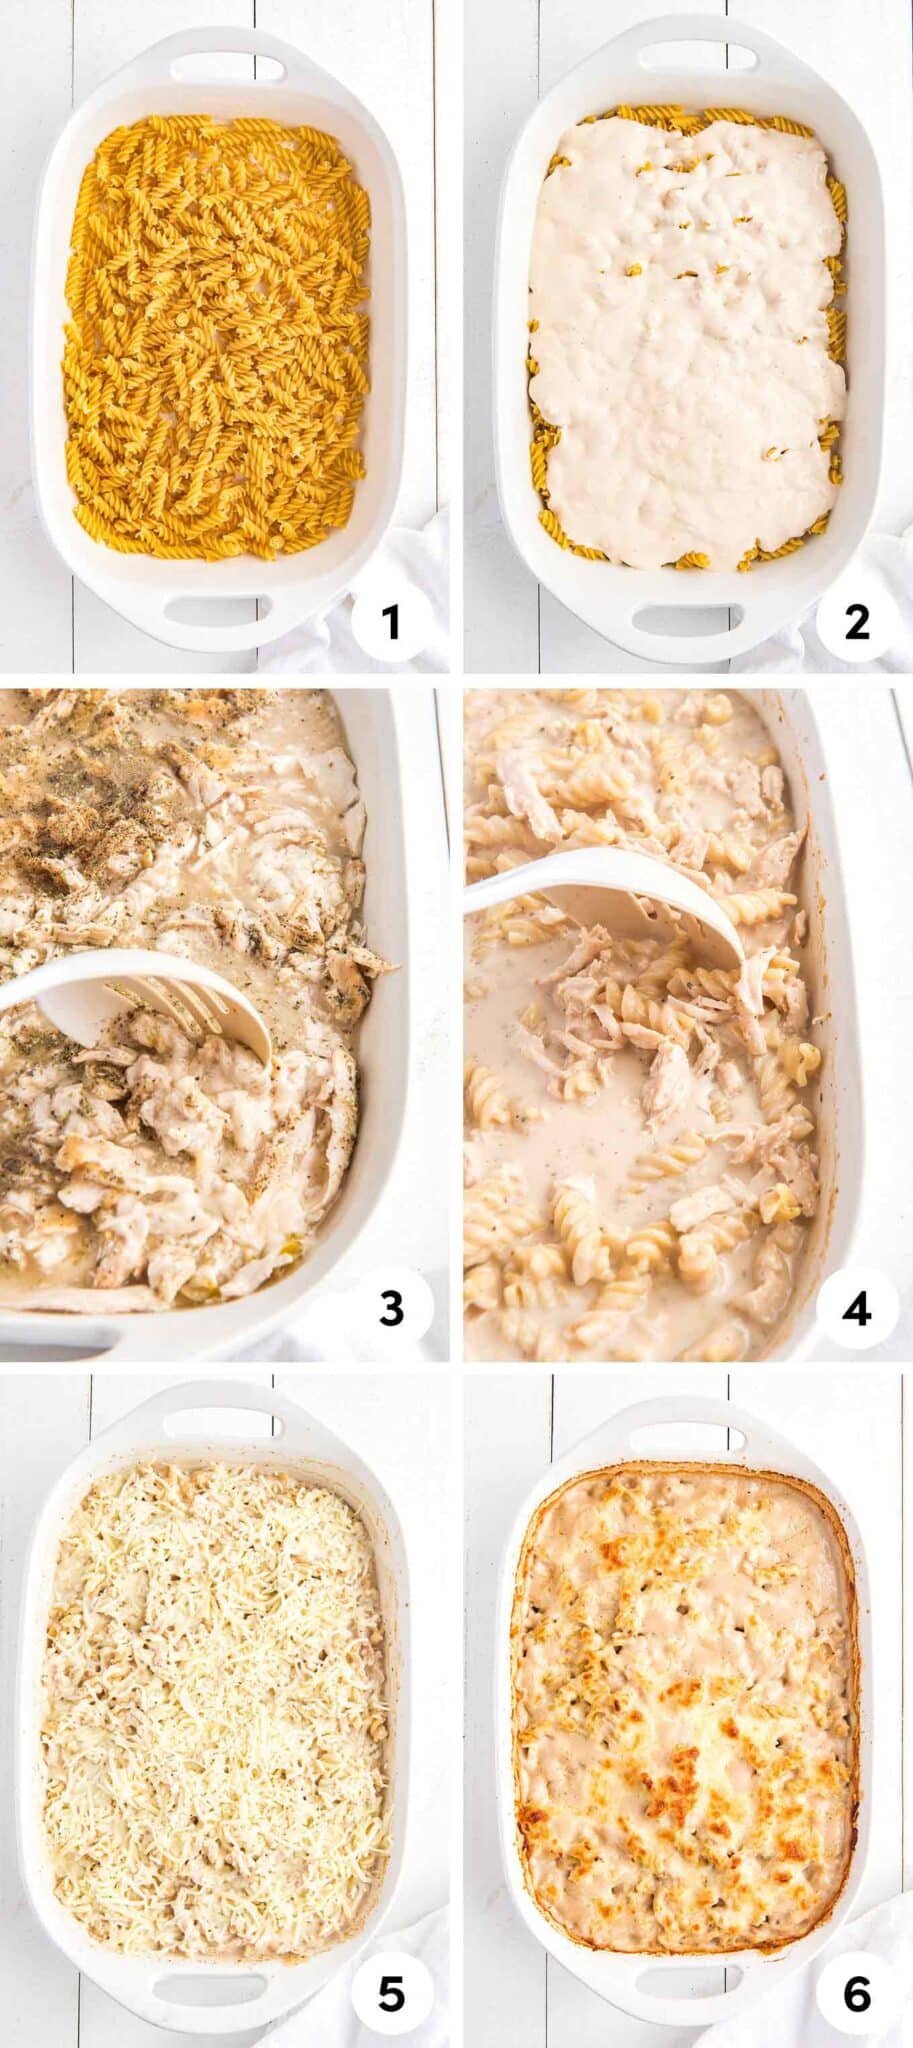 Showing how to make chicken Alfredo bake in a 6 step collage. 